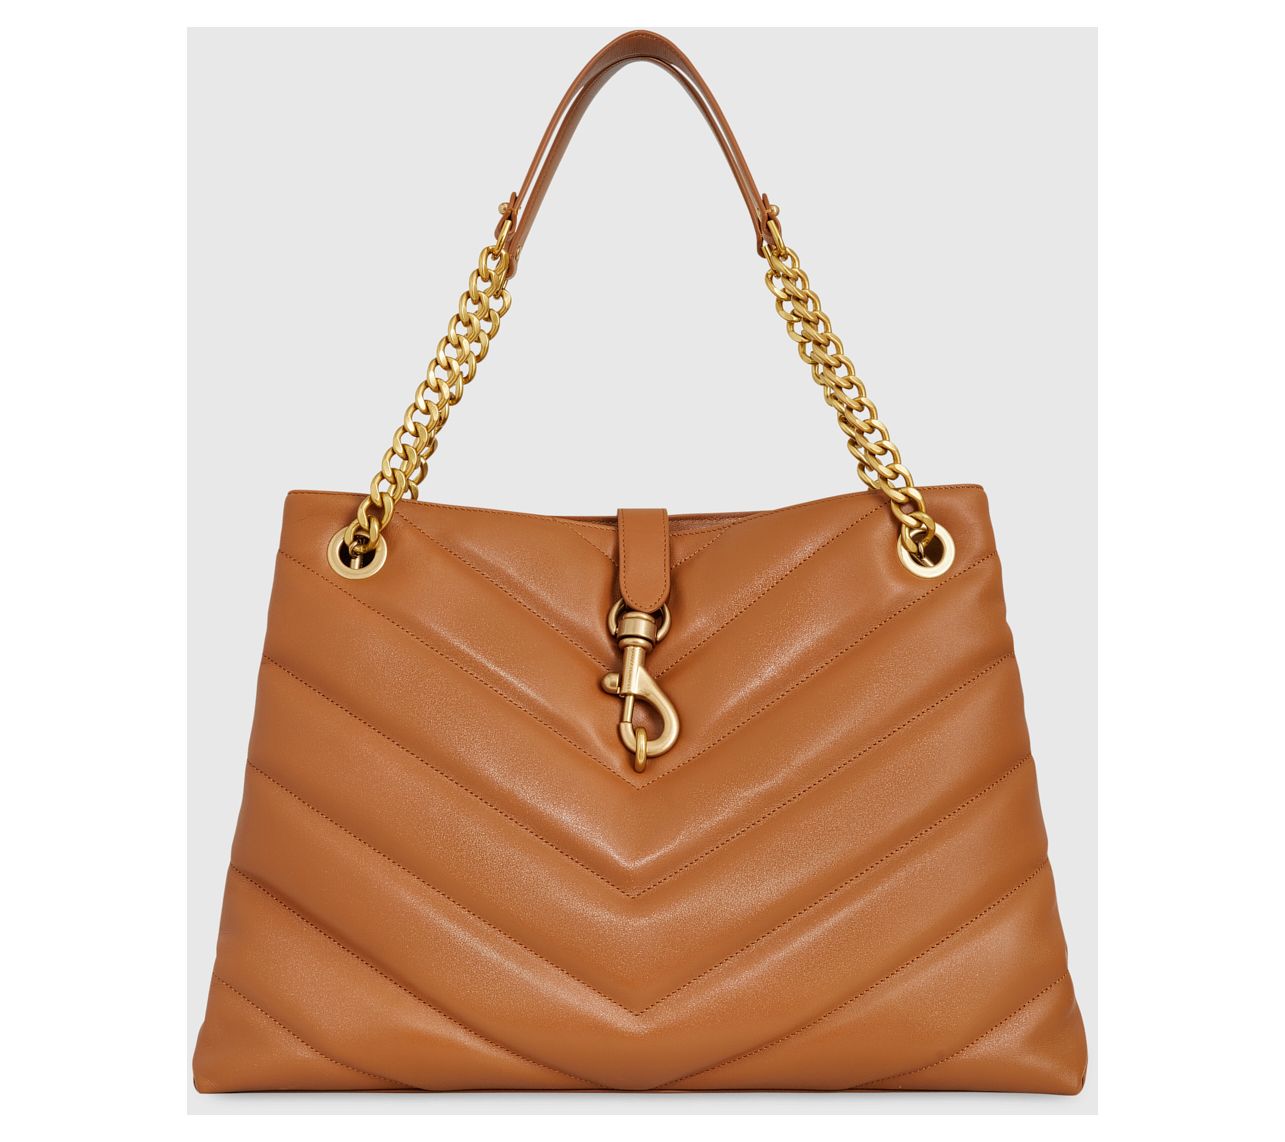 Saint Laurent Shopper Tote bag street style outfit - FROM LUXE WITH LOVE